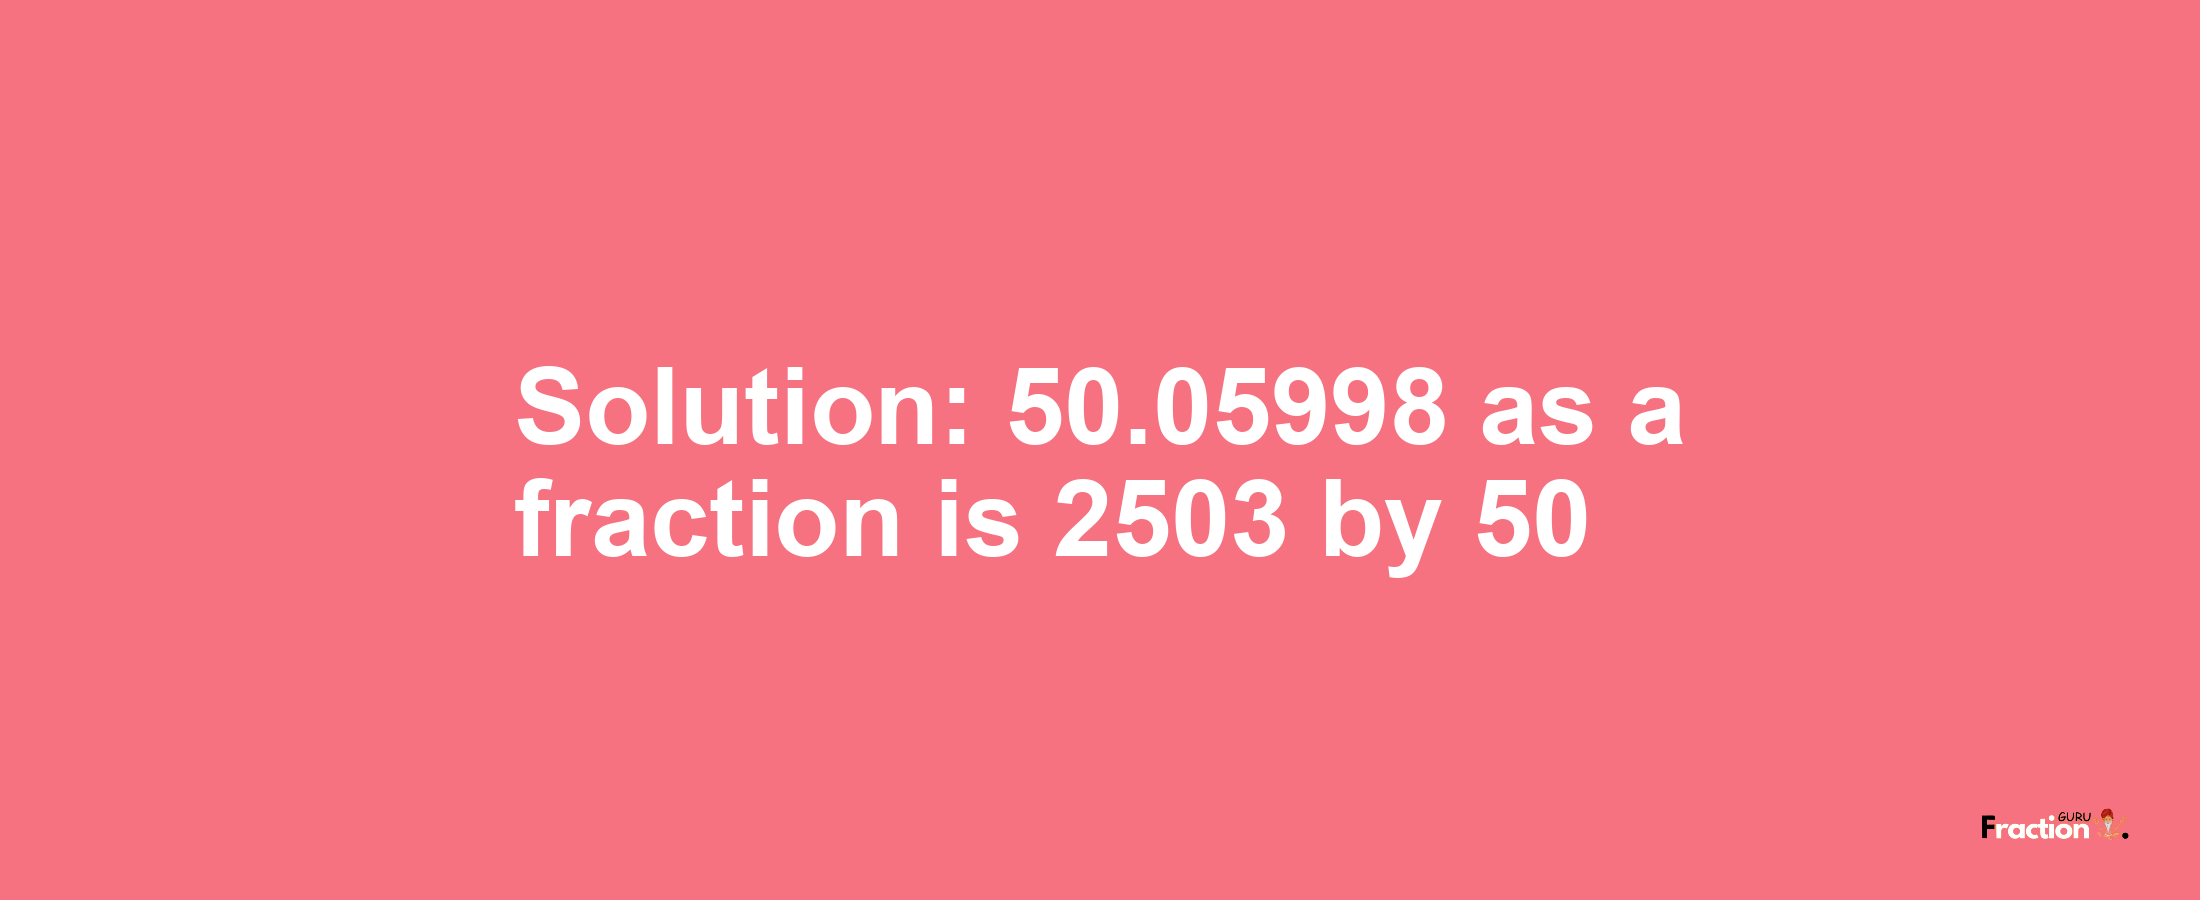 Solution:50.05998 as a fraction is 2503/50